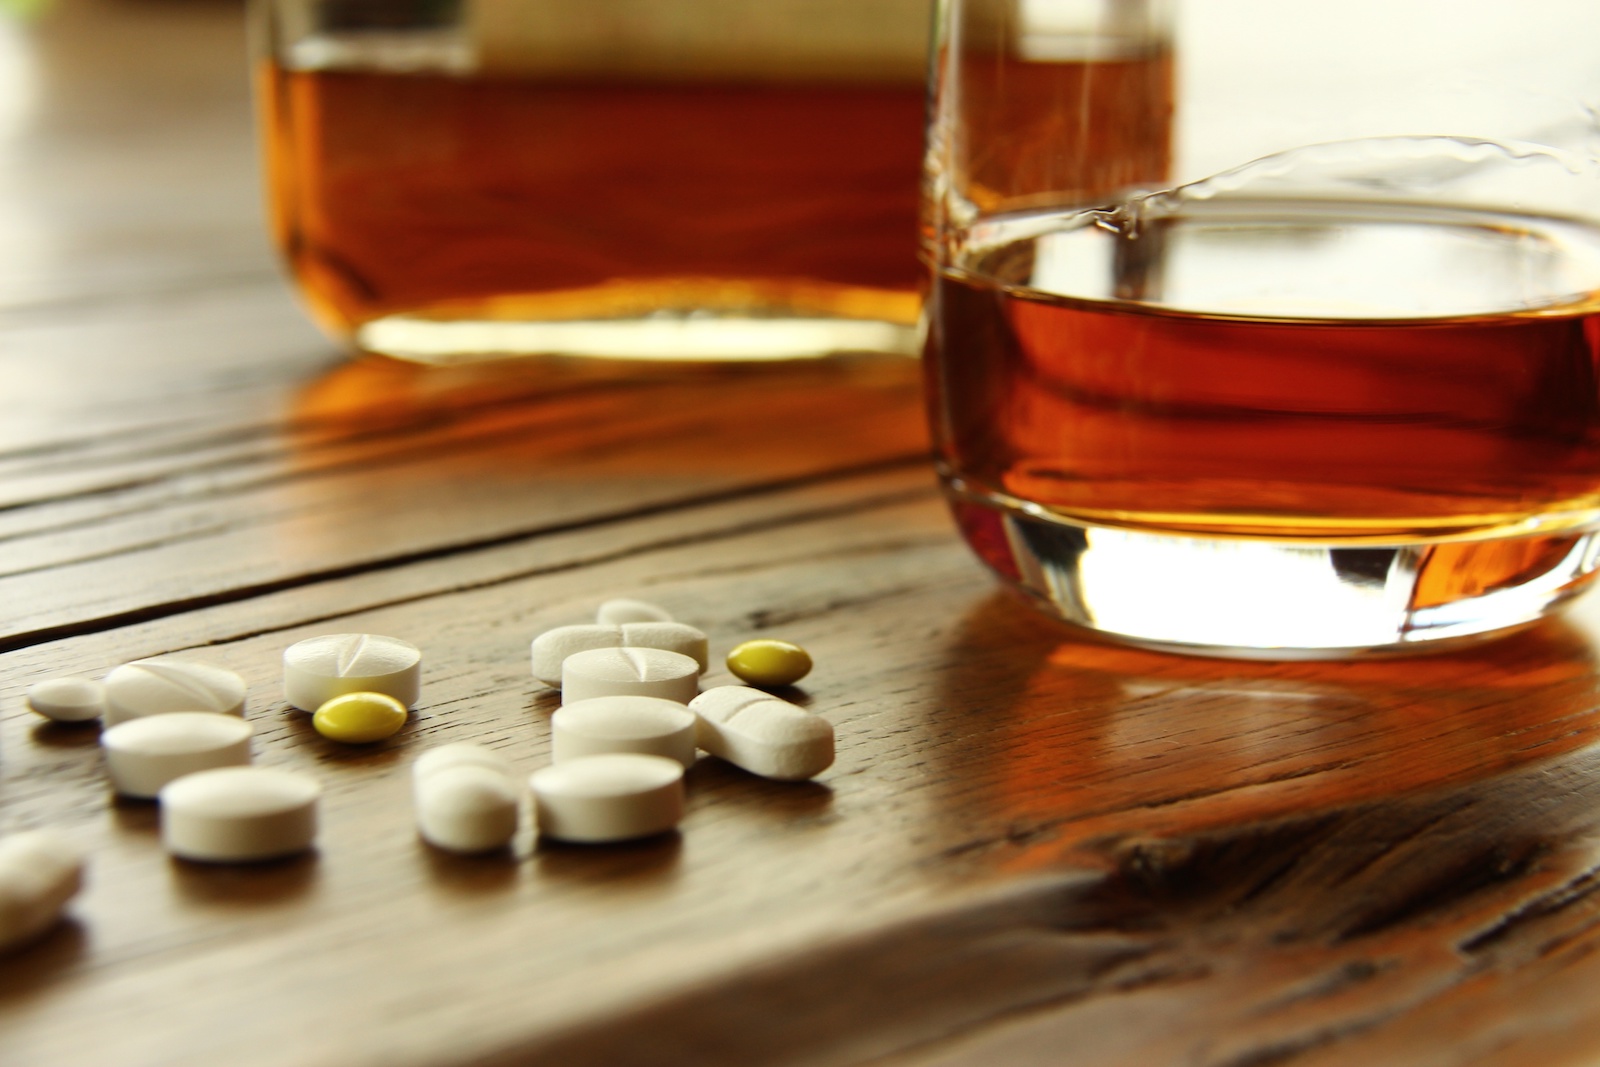 Hydrocodone And Alcohol: The Dangerous Combo You Want To Stay Away From